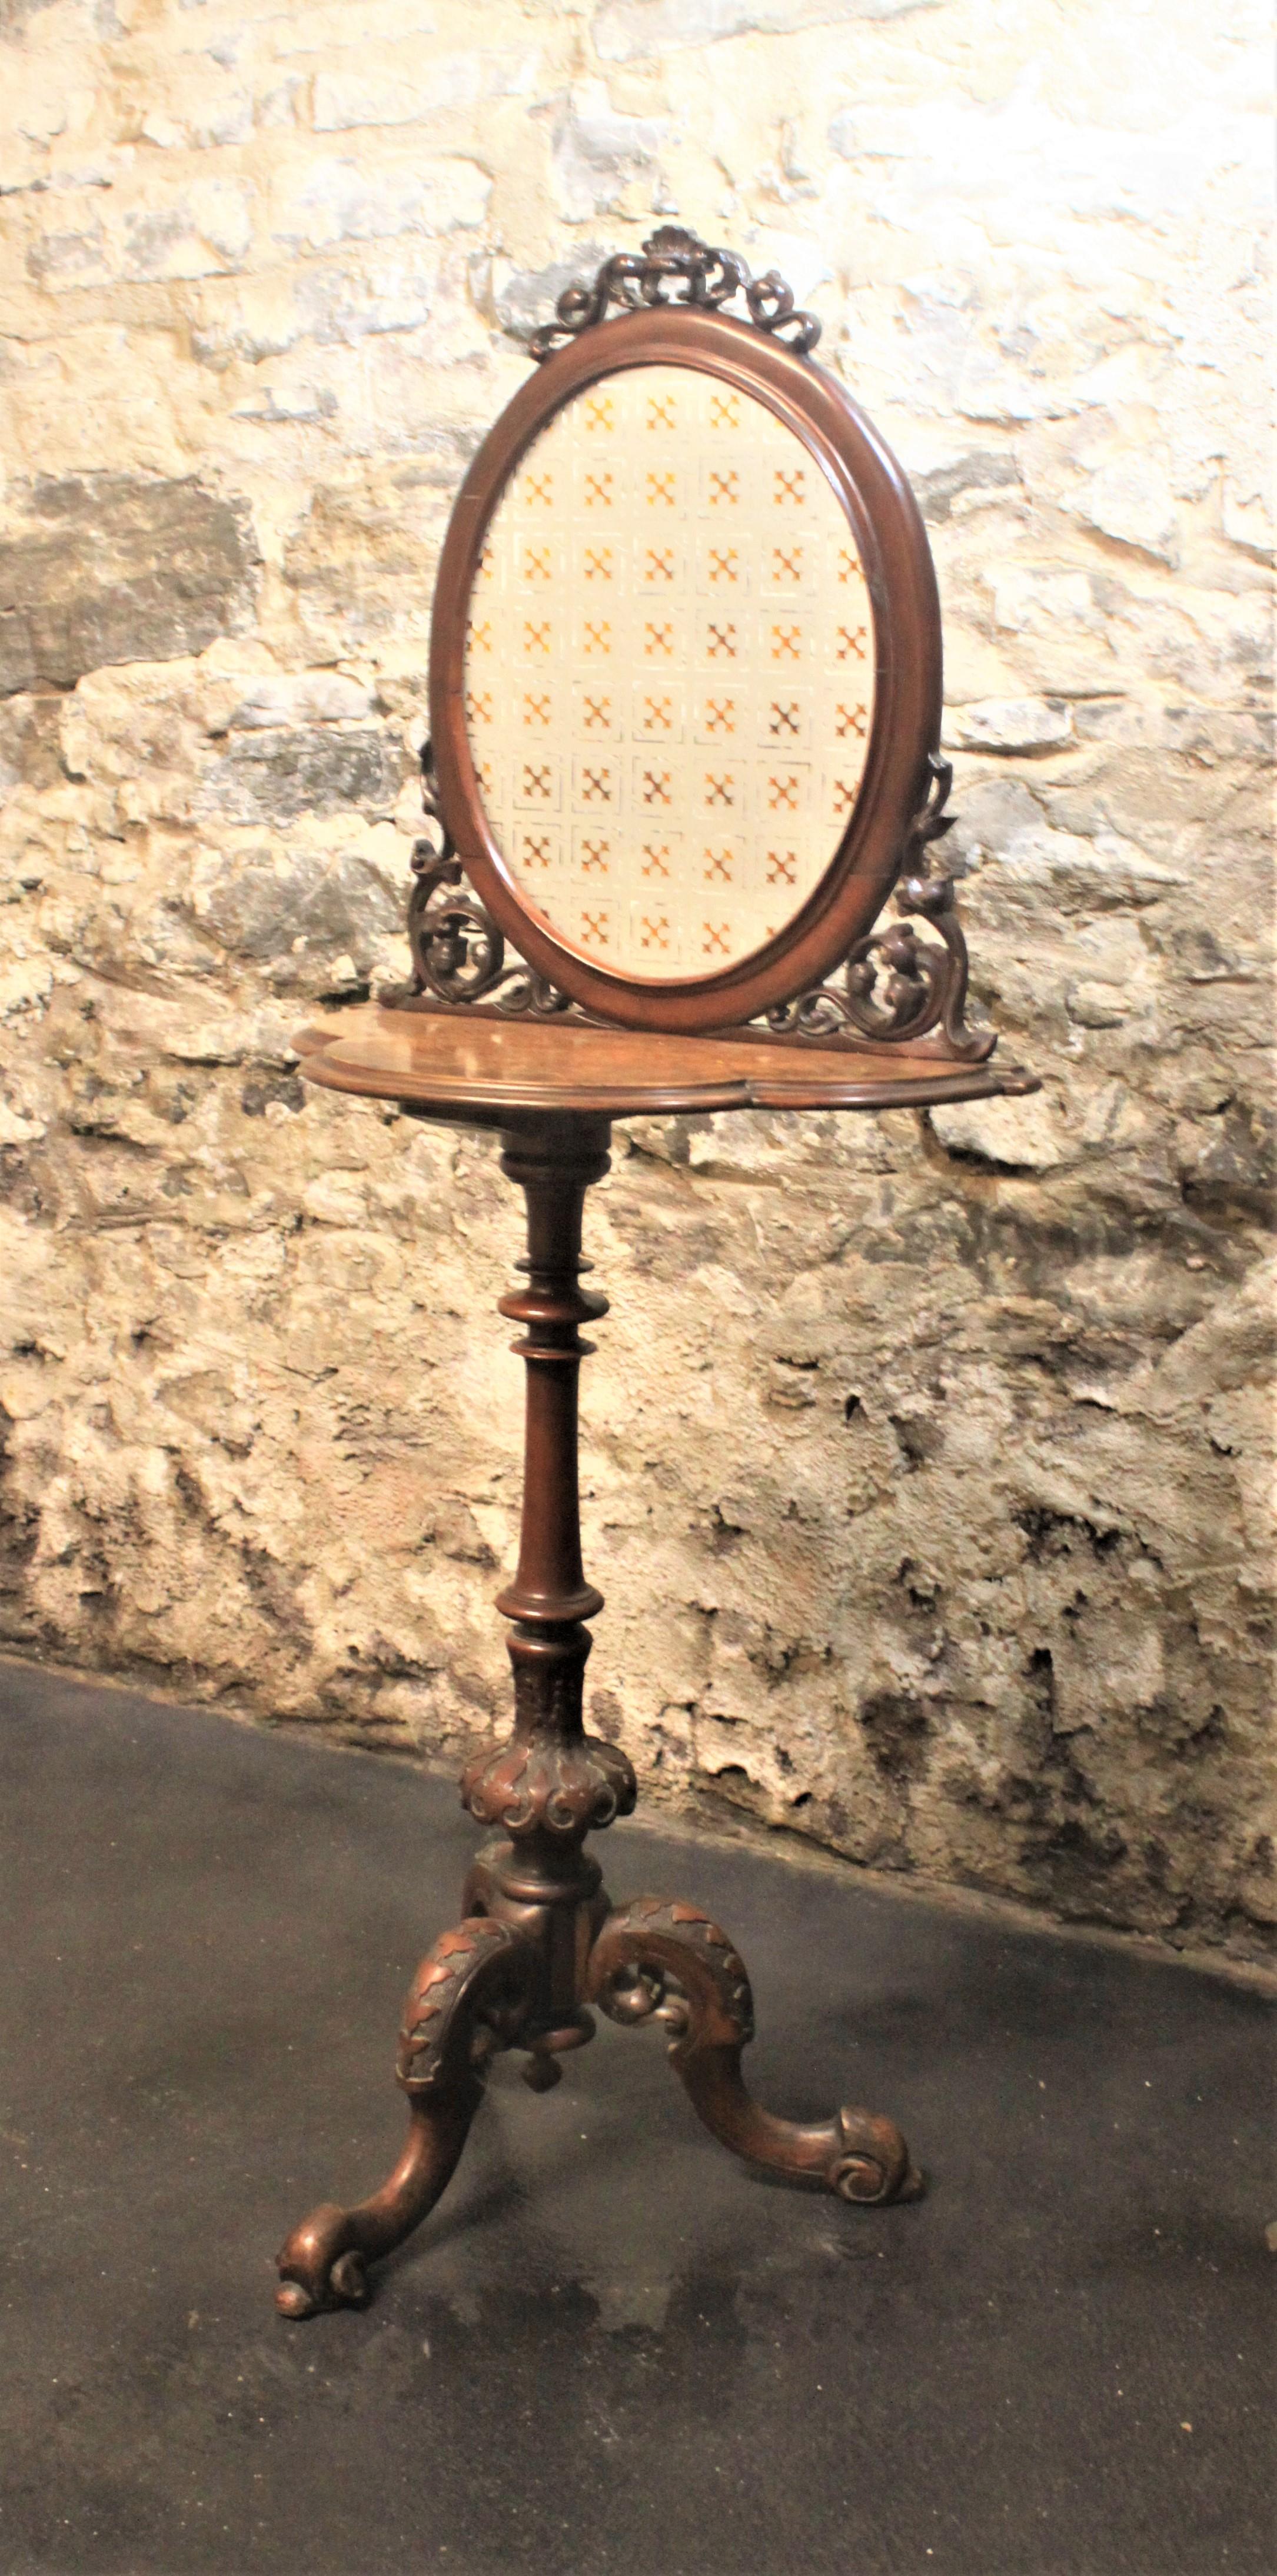 Dating from the Victorian period and likely being made in England is a unique and decorative demilune style accent table or candle stand. The pedestal legs and upper frame are carved walnut and the tabletop is inlaid with a decorative design. The